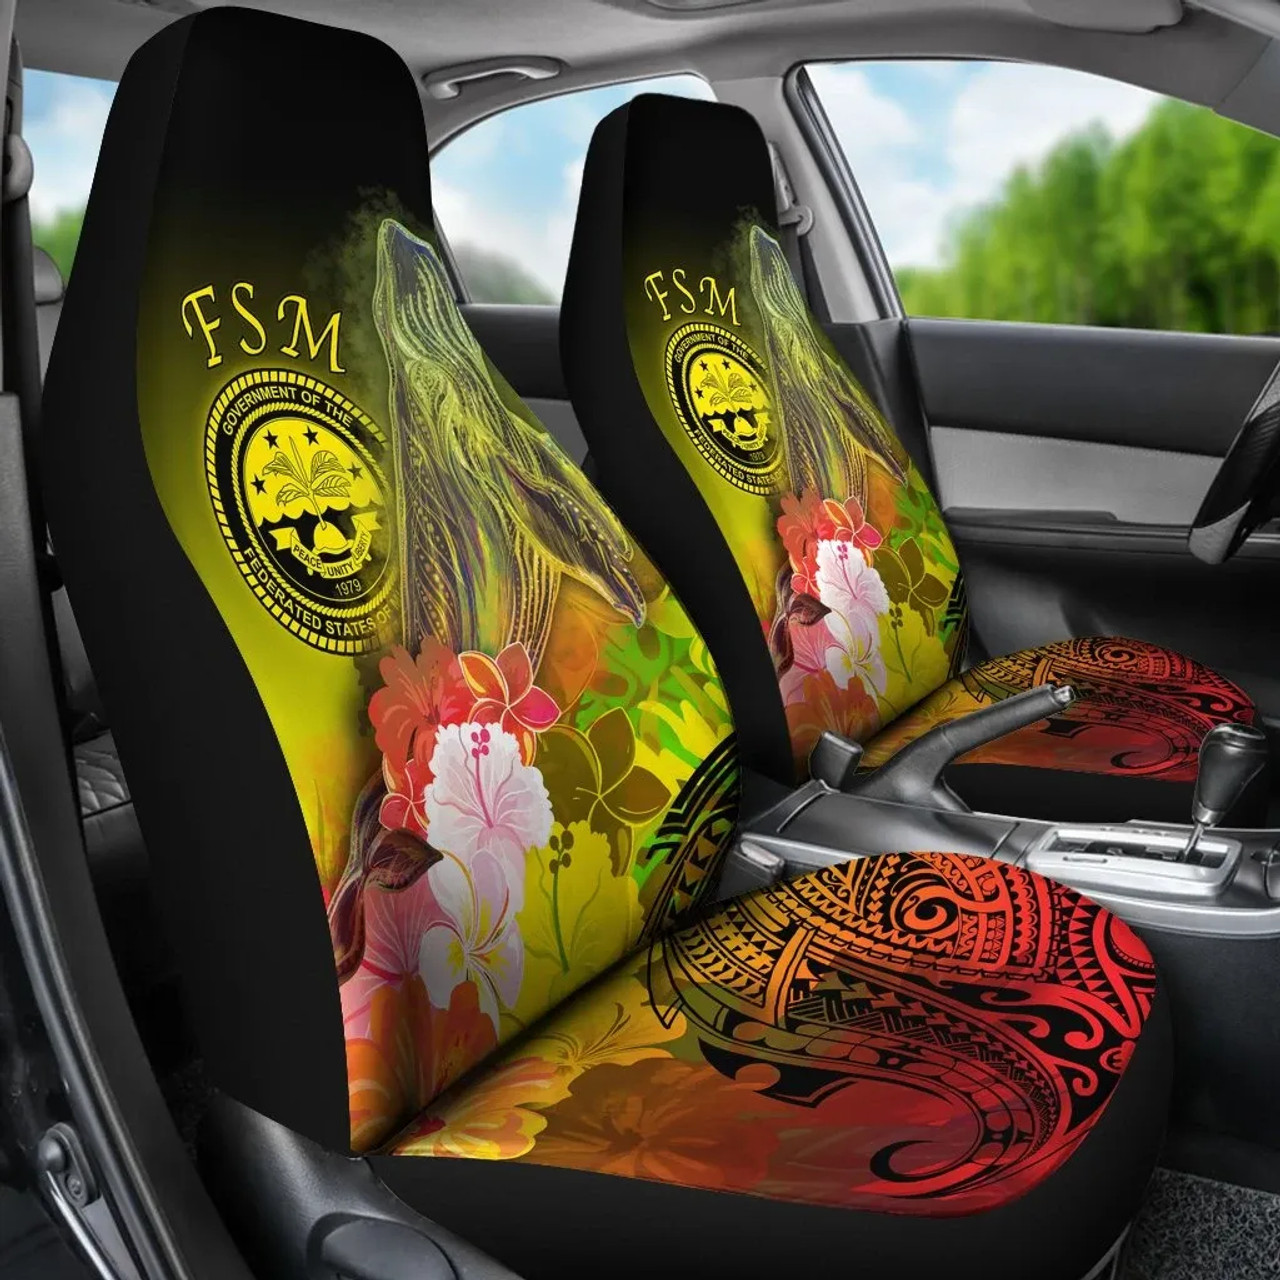 Federated States of Micronesia Car Seat Covers - Humpback Whale with Tropical Flowers (Yellow)